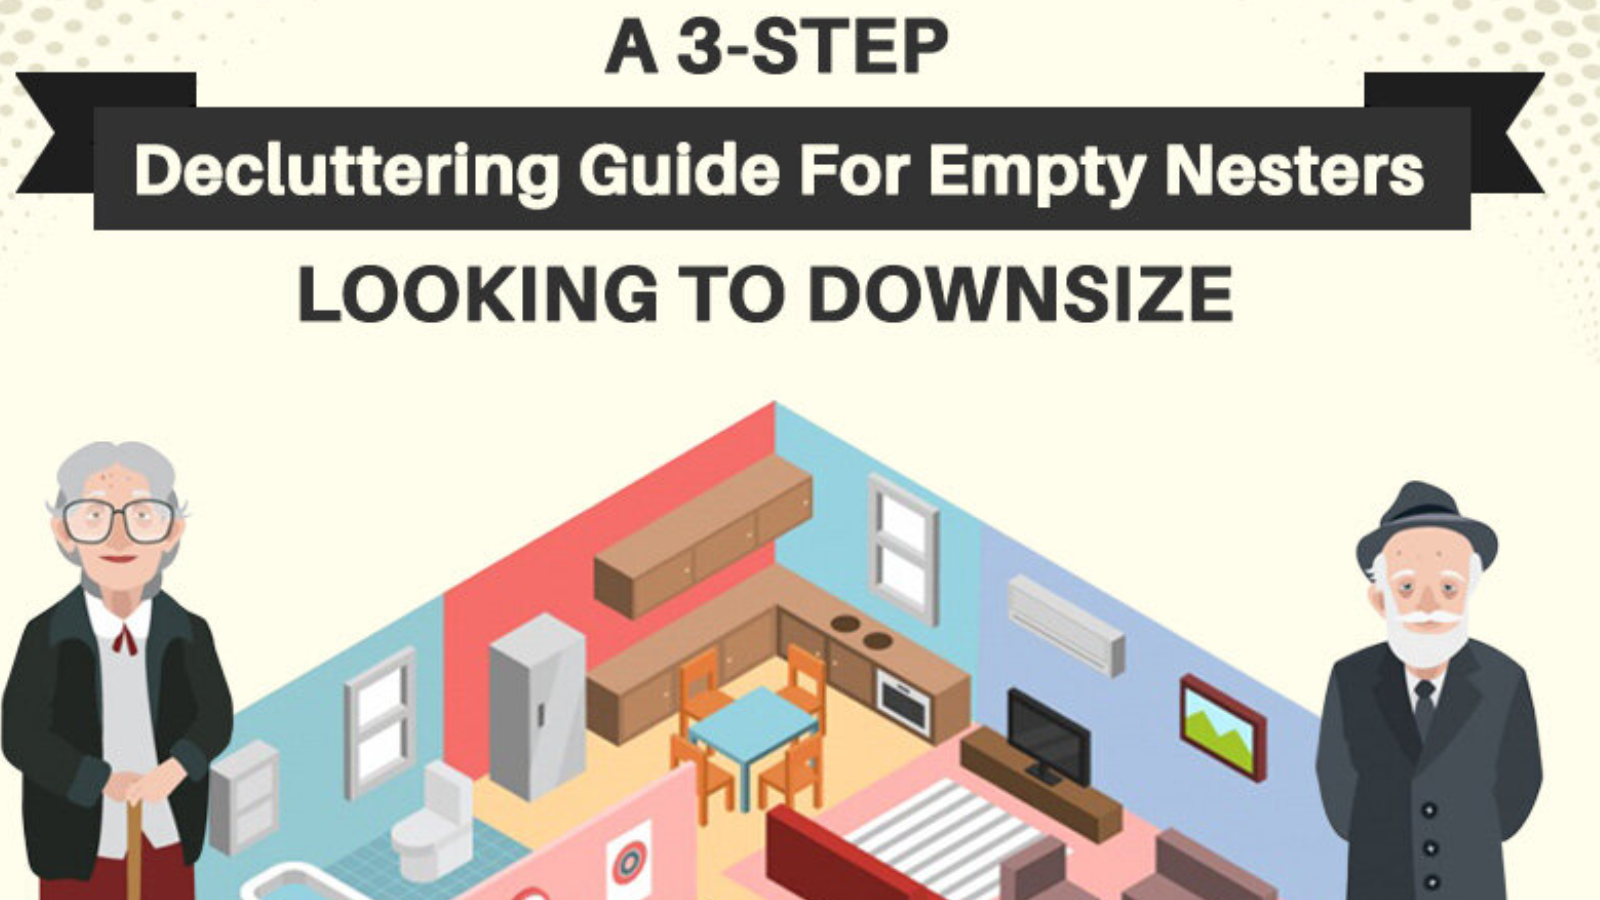 A 3-Step Decluttering Guide For Empty Nesters Looking To Downsize